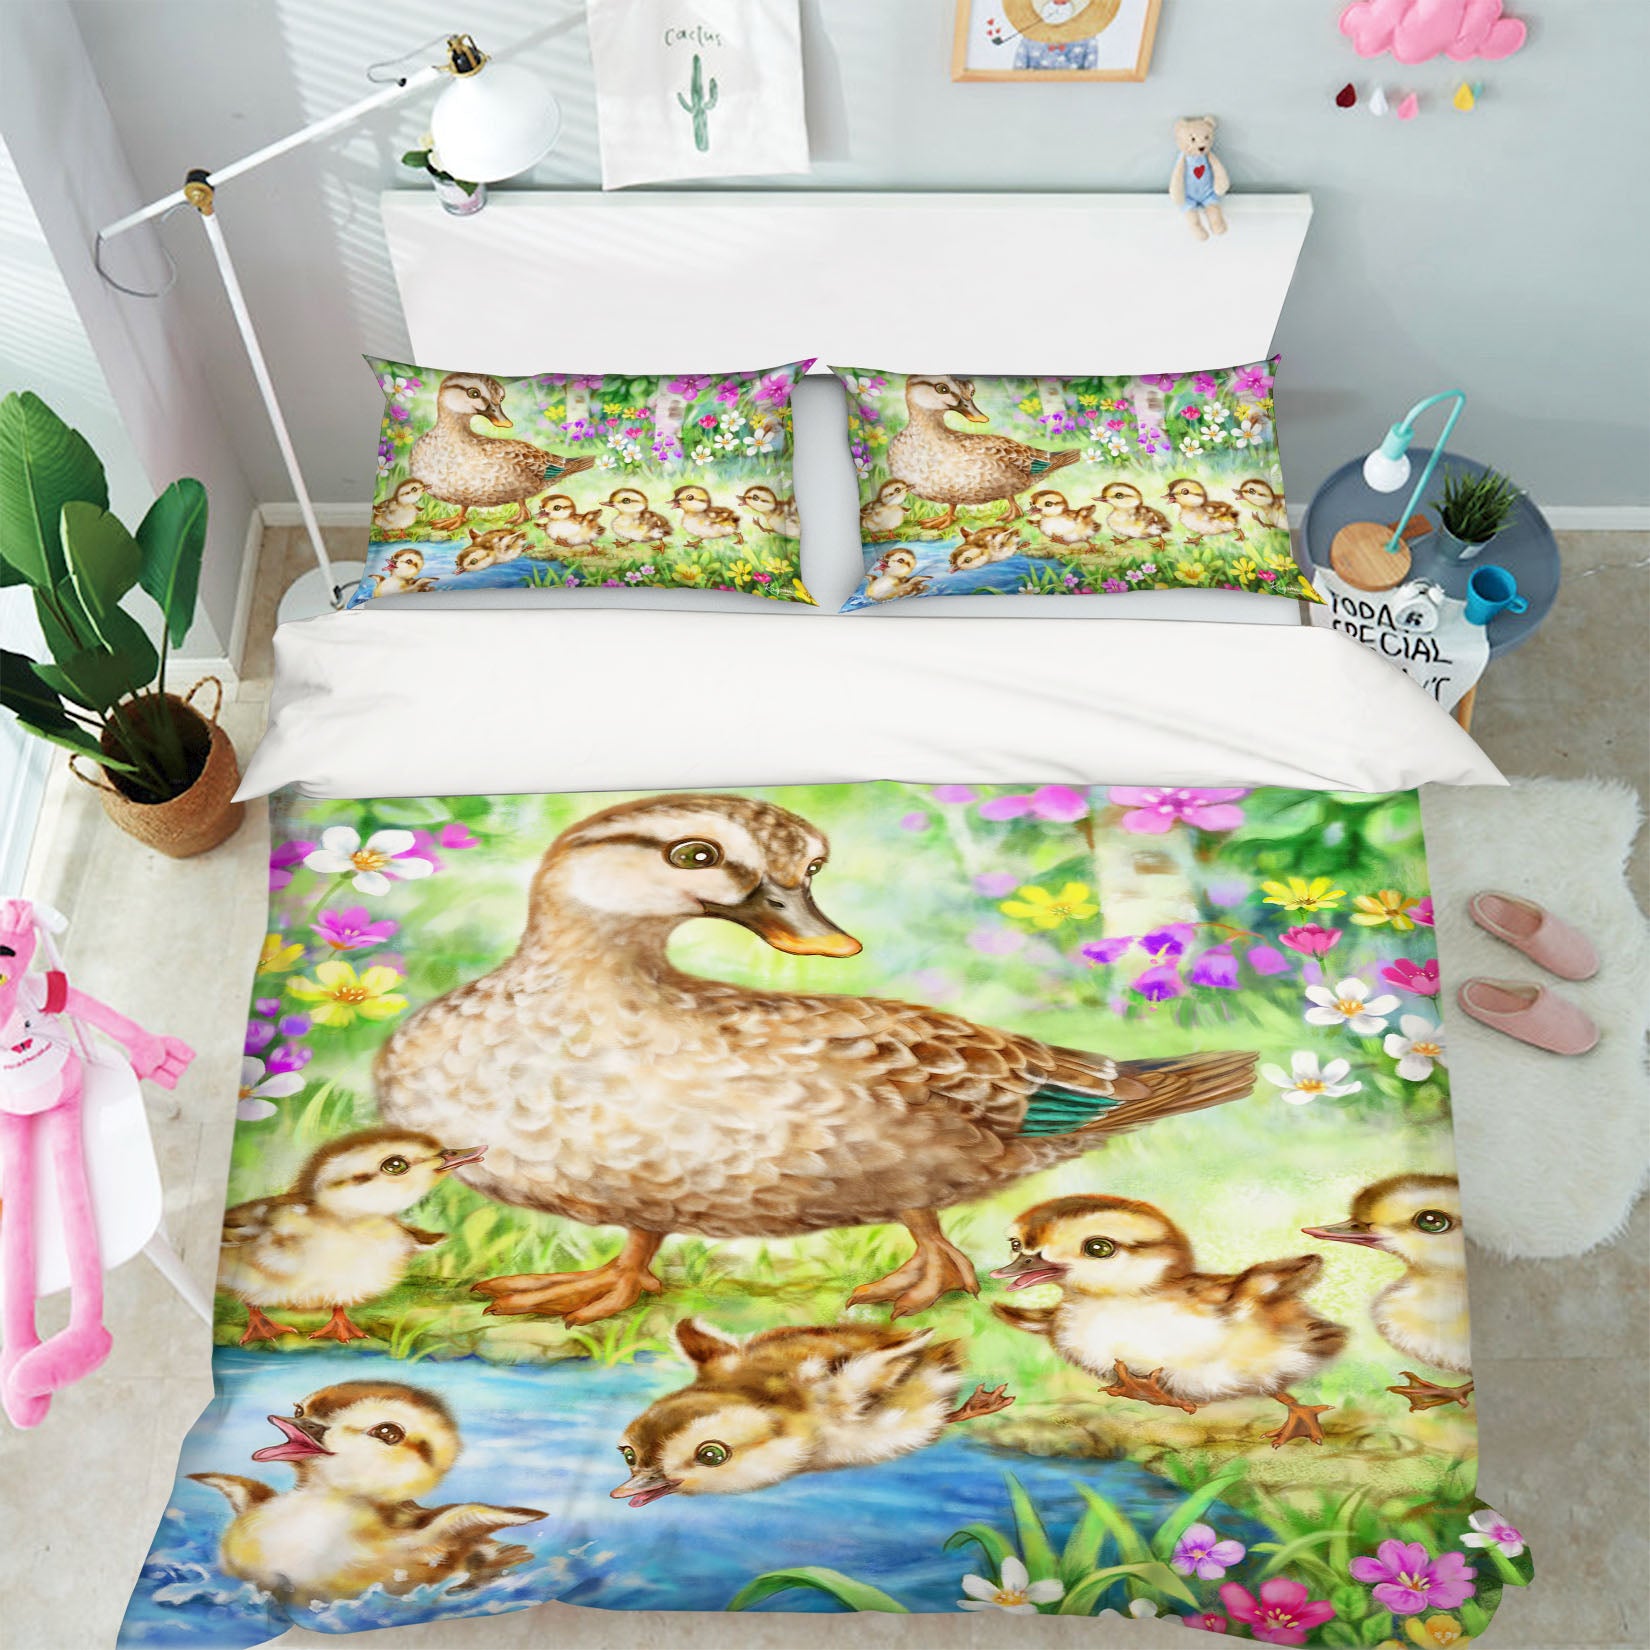 3D Baby Duck 5928 Kayomi Harai Bedding Bed Pillowcases Quilt Cover Duvet Cover